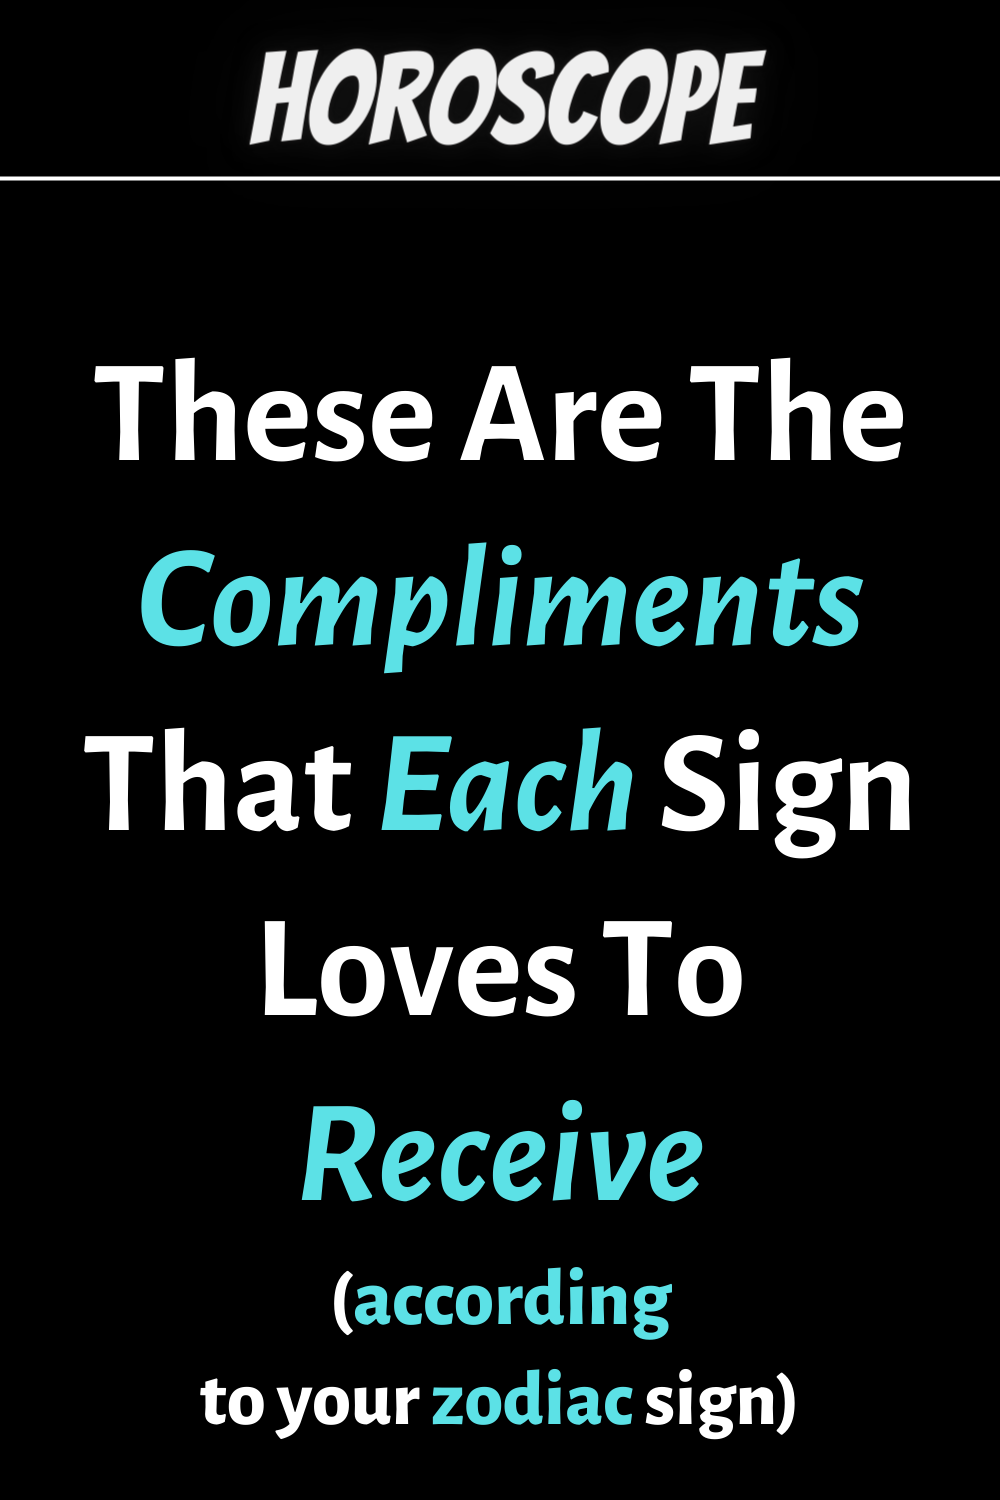 These Are The Compliments That Each Zodiac Sign Loves To Receive